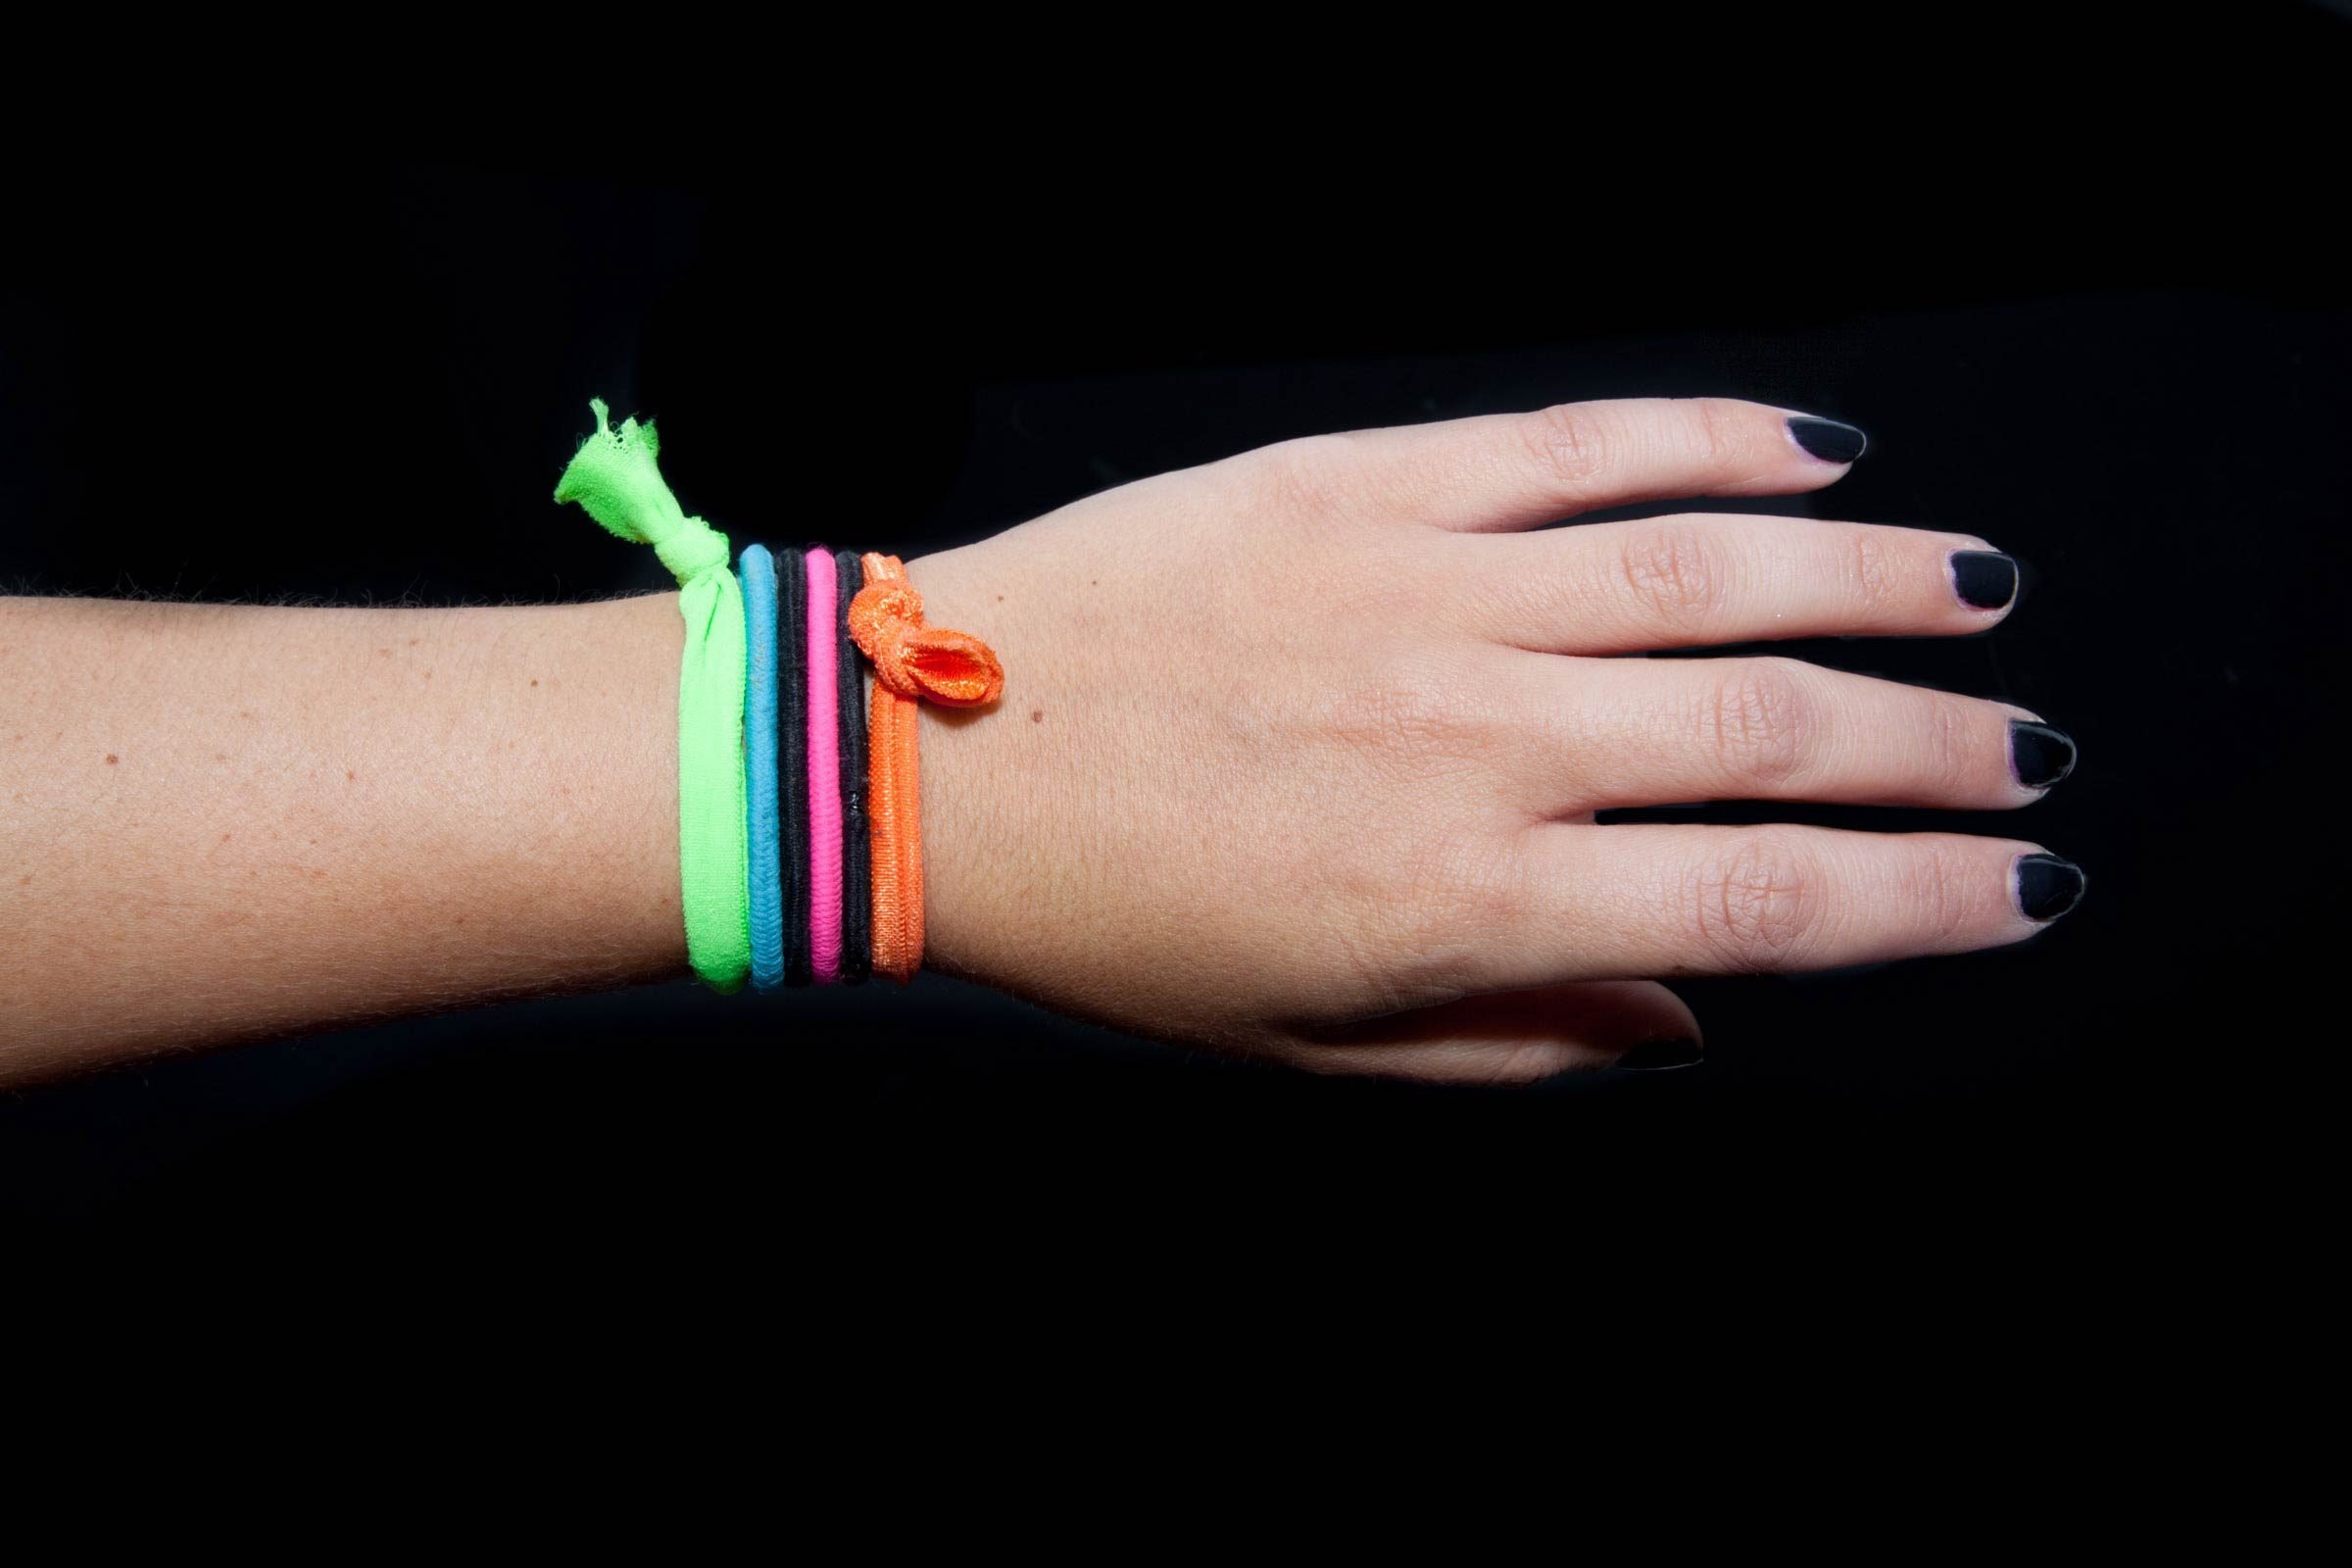 How a Hair Tie on Your Wrist Could Cause Infection